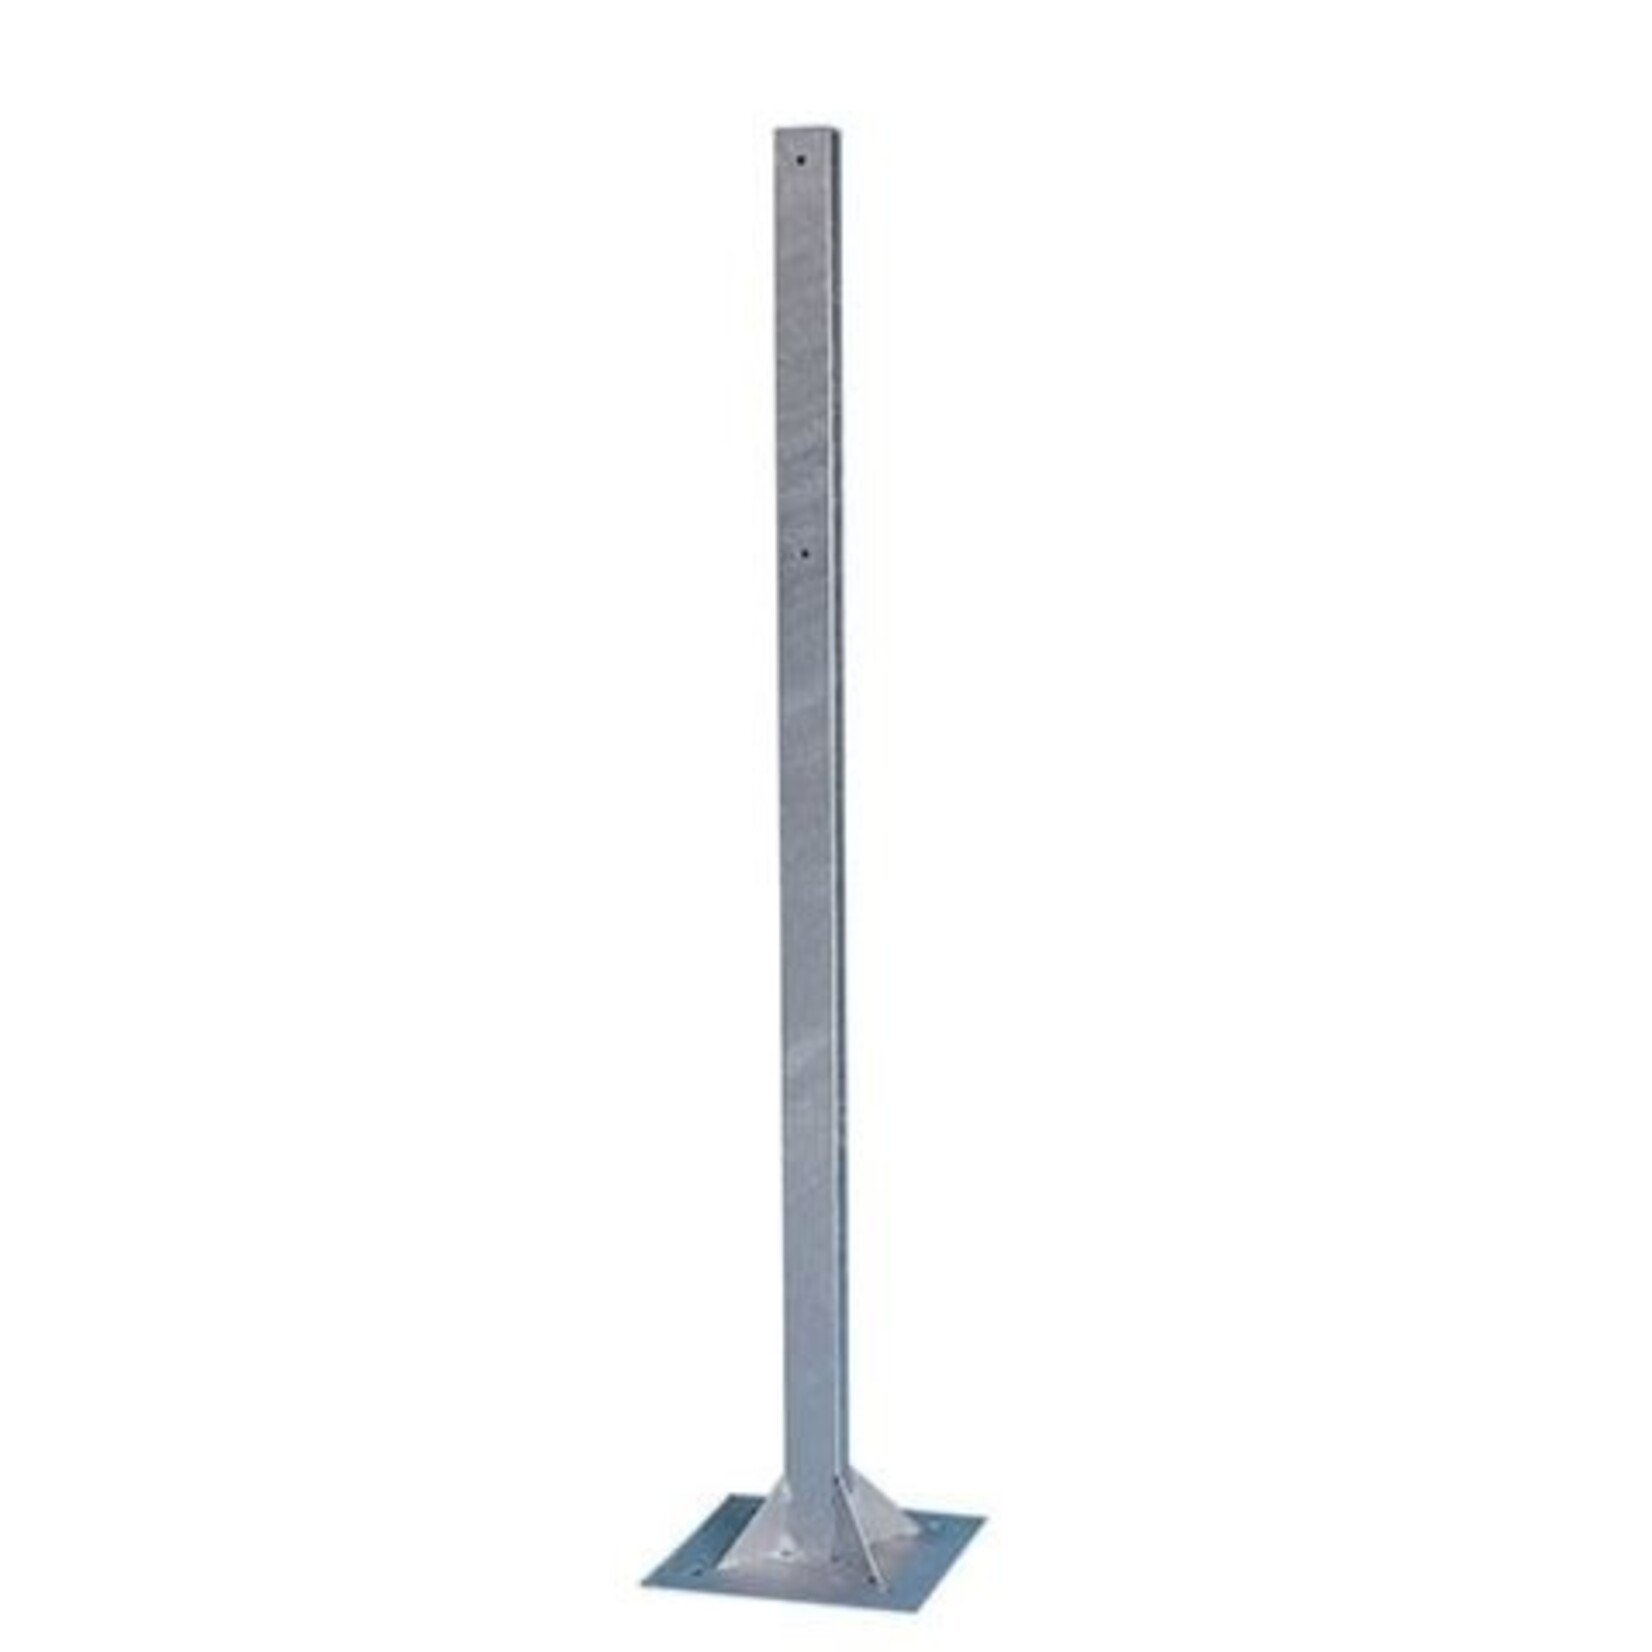 Plastimo Pole for ring buoy container